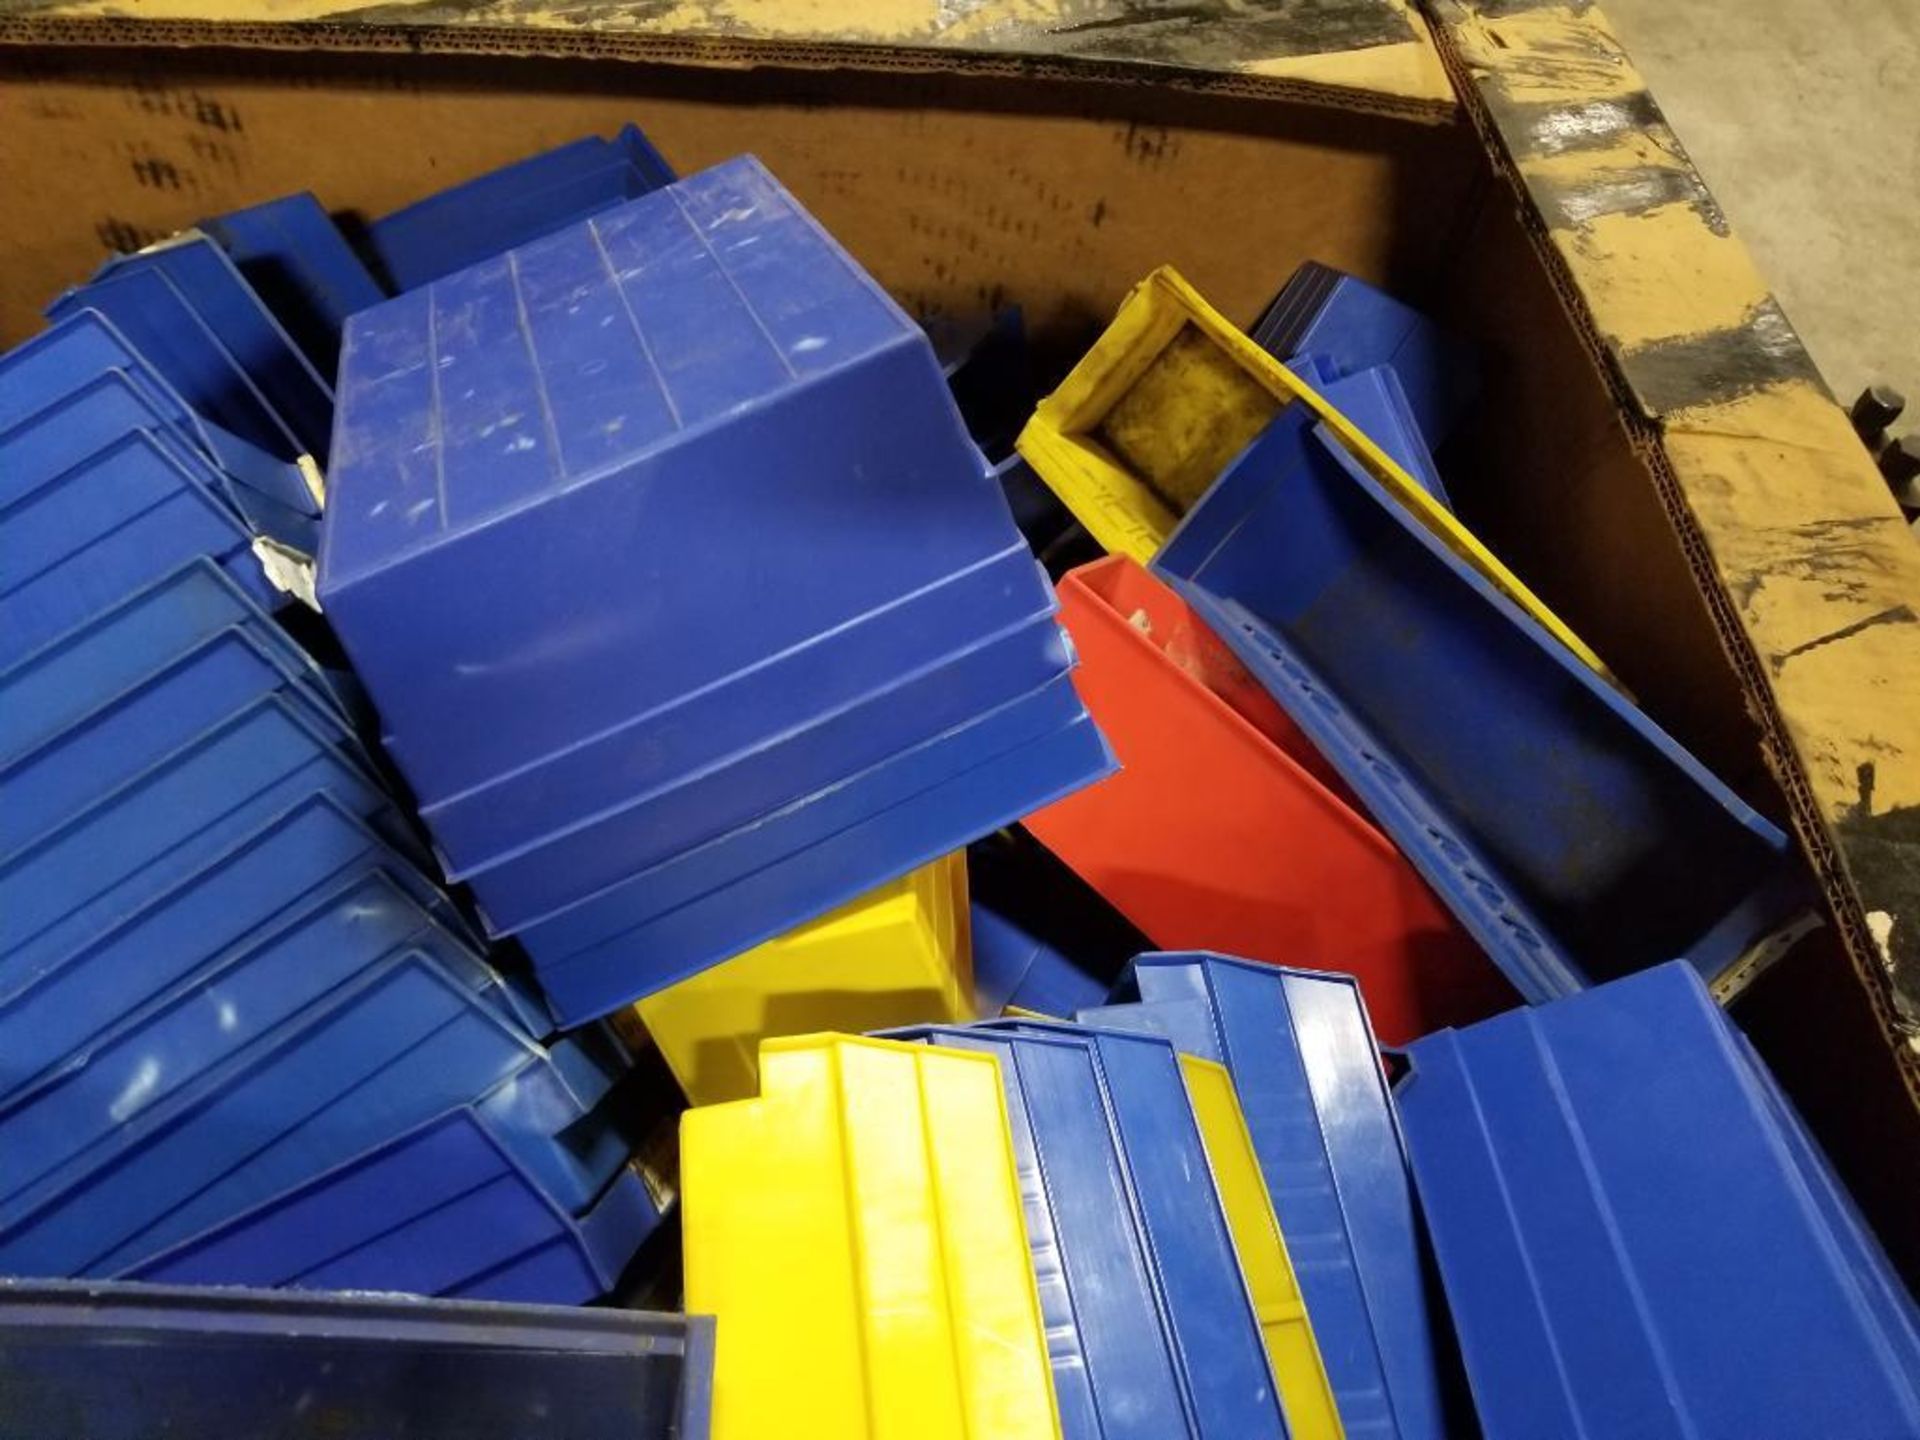 Gaylord of assorted plastic sorting bins. - Image 5 of 10